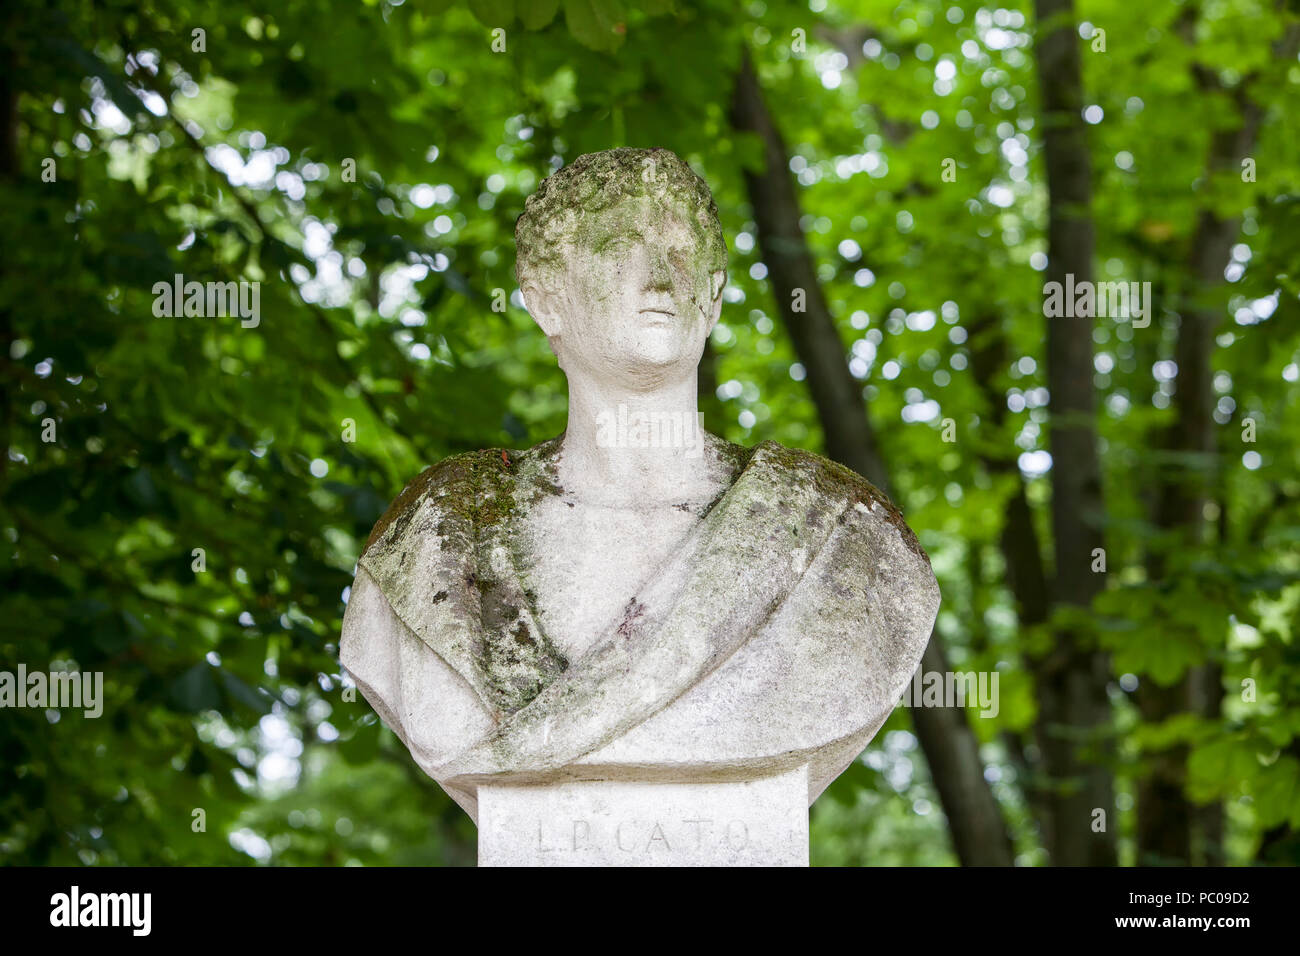 Bust of Lucius Porcius Cato at Nordkirchen Moated Palace, Germany Stock Photo